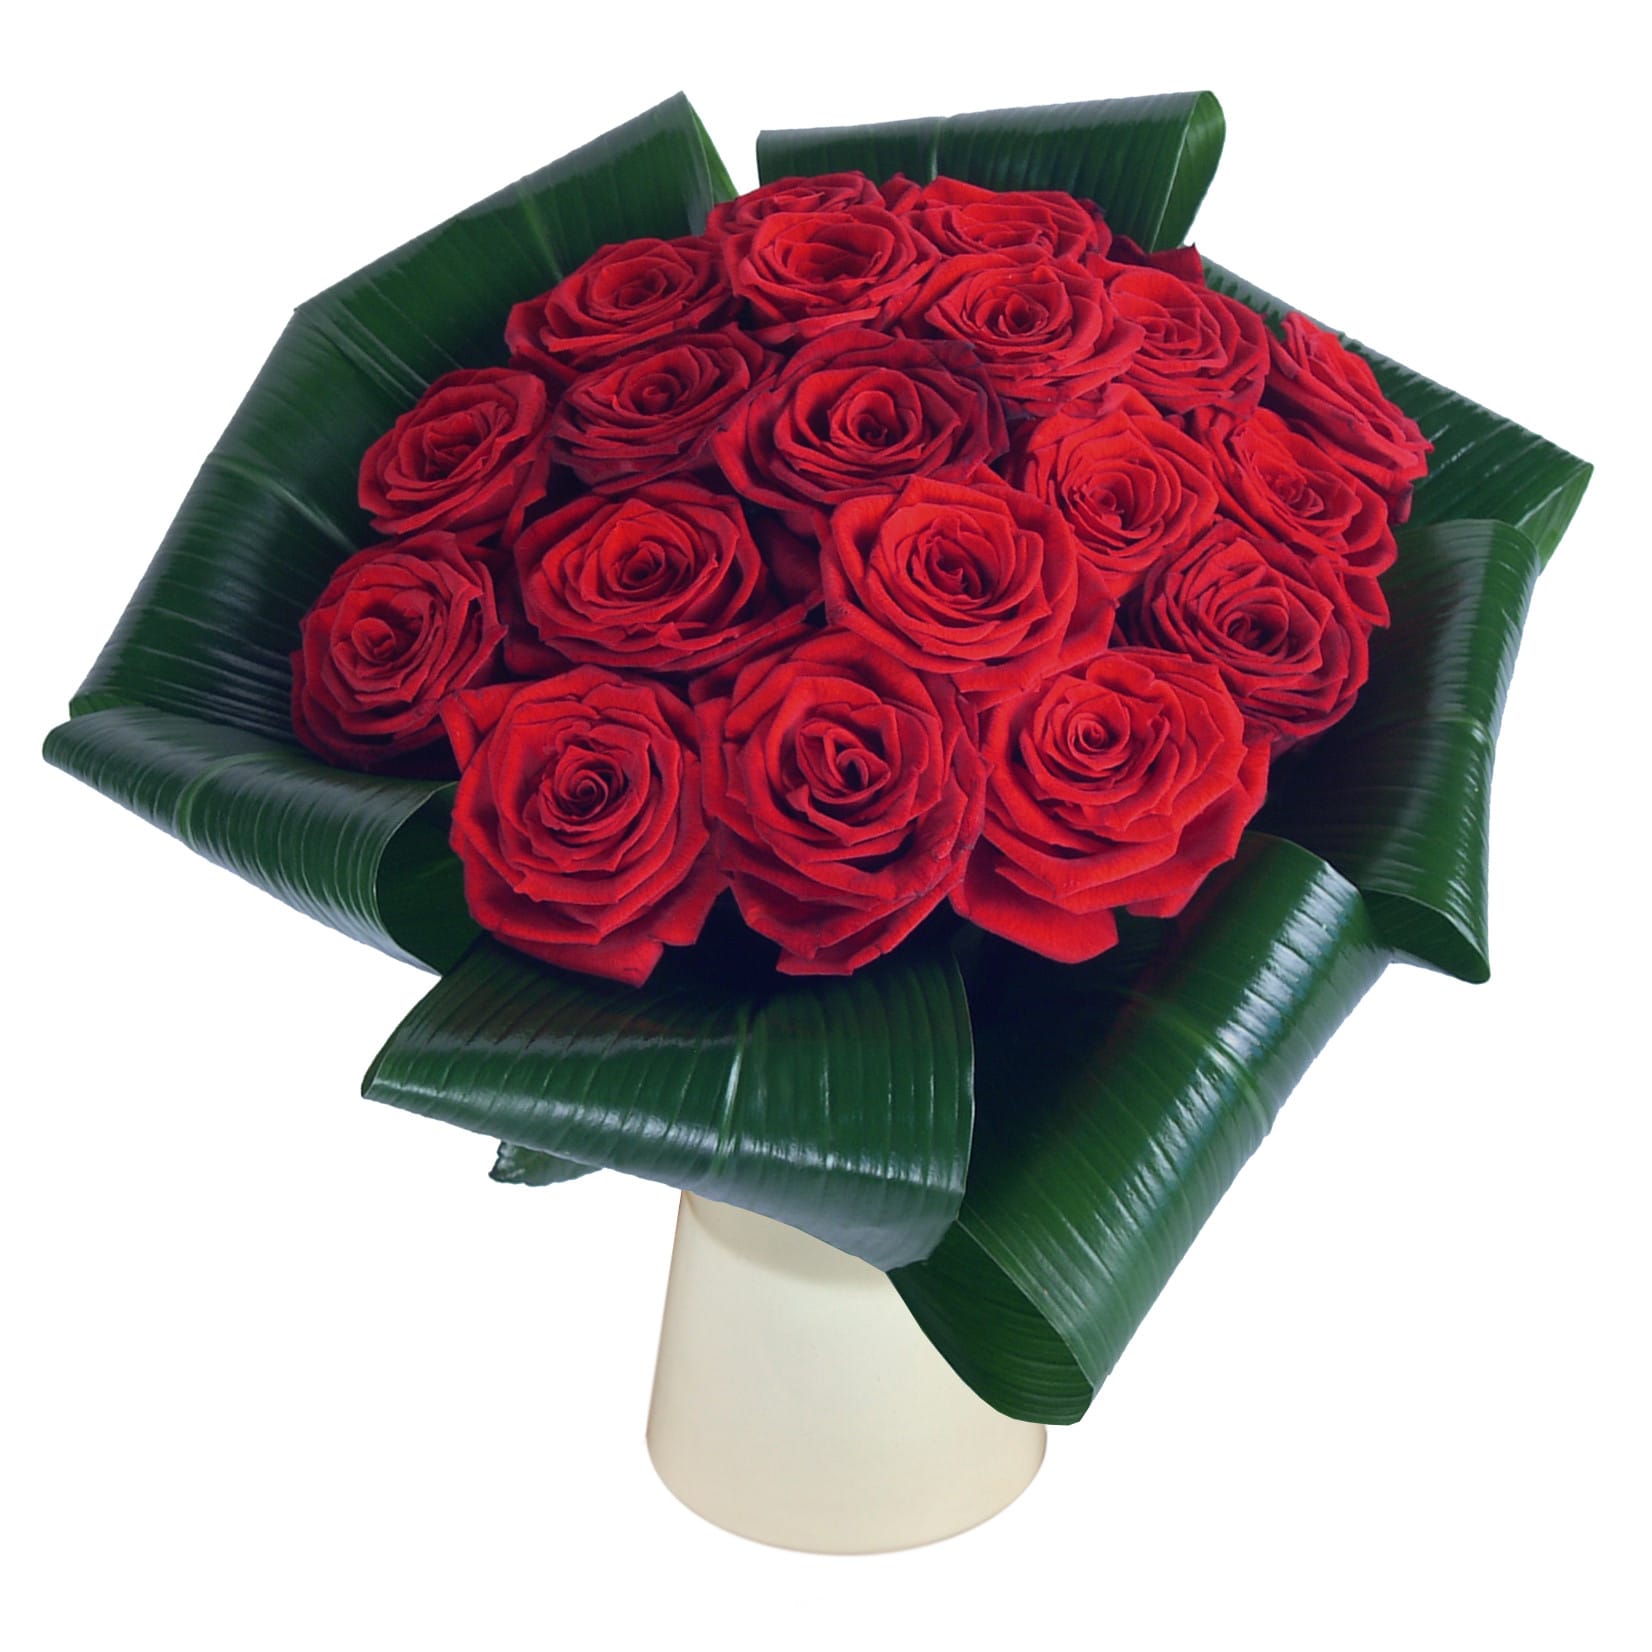 Love - 20 Red Roses half price special offer on subscriptions.